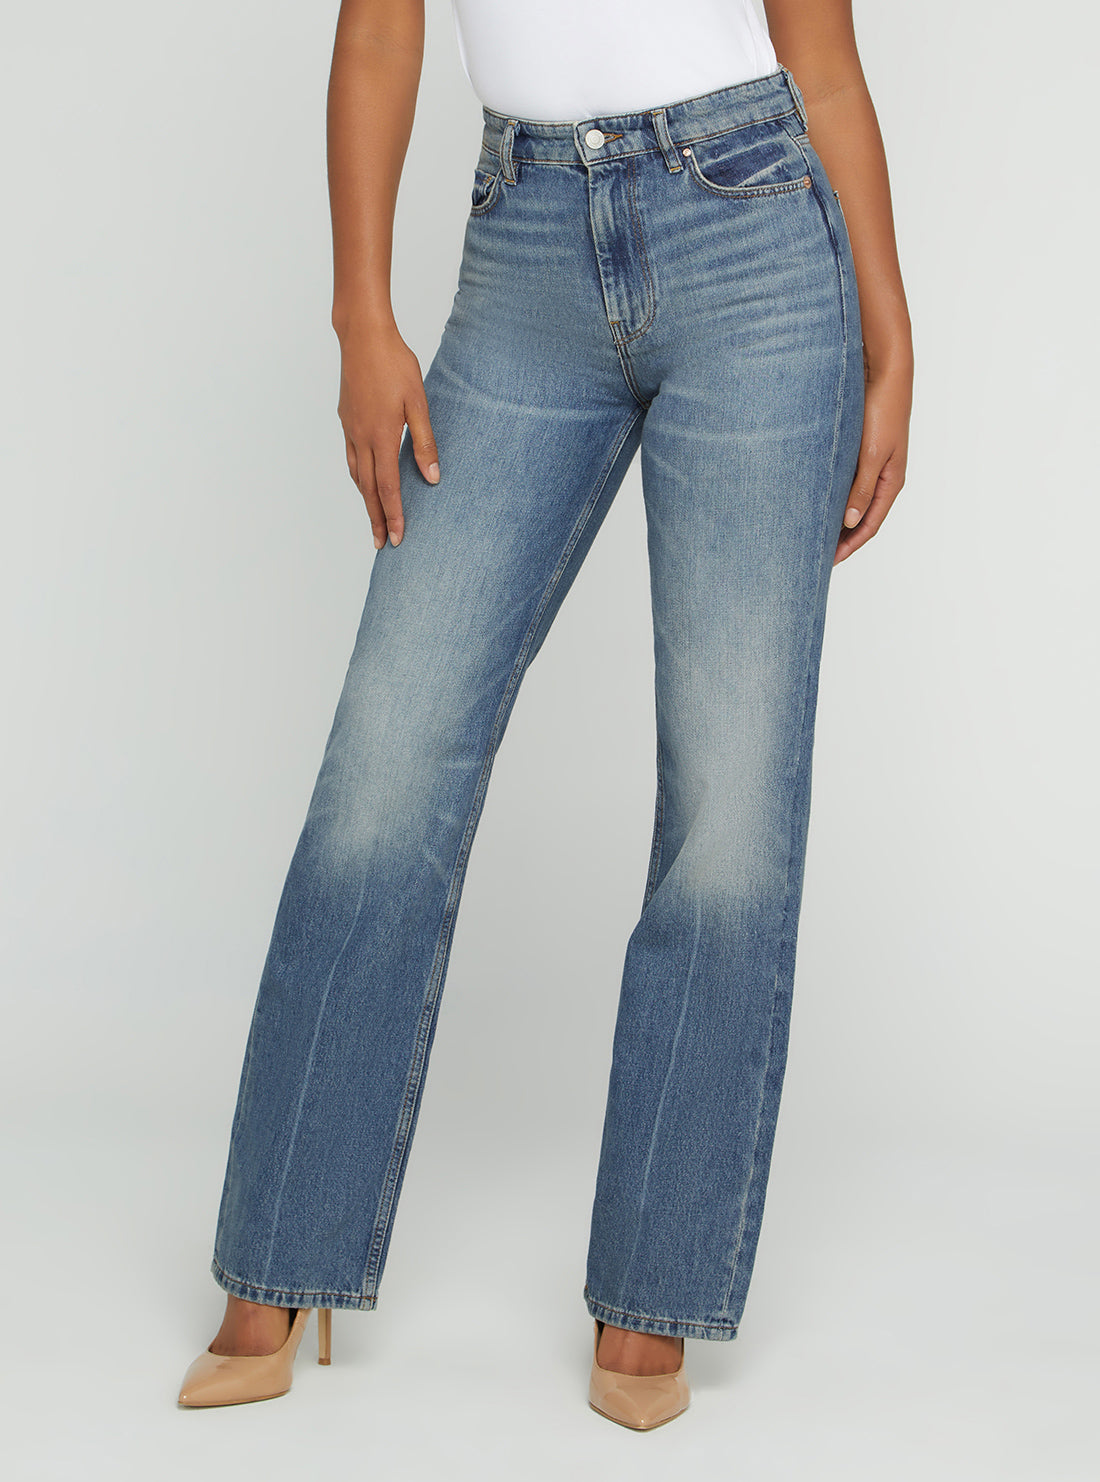 GUESS Women's High-Rise 80s Straight Leg Denim Jeans In Confidence Wash Front View